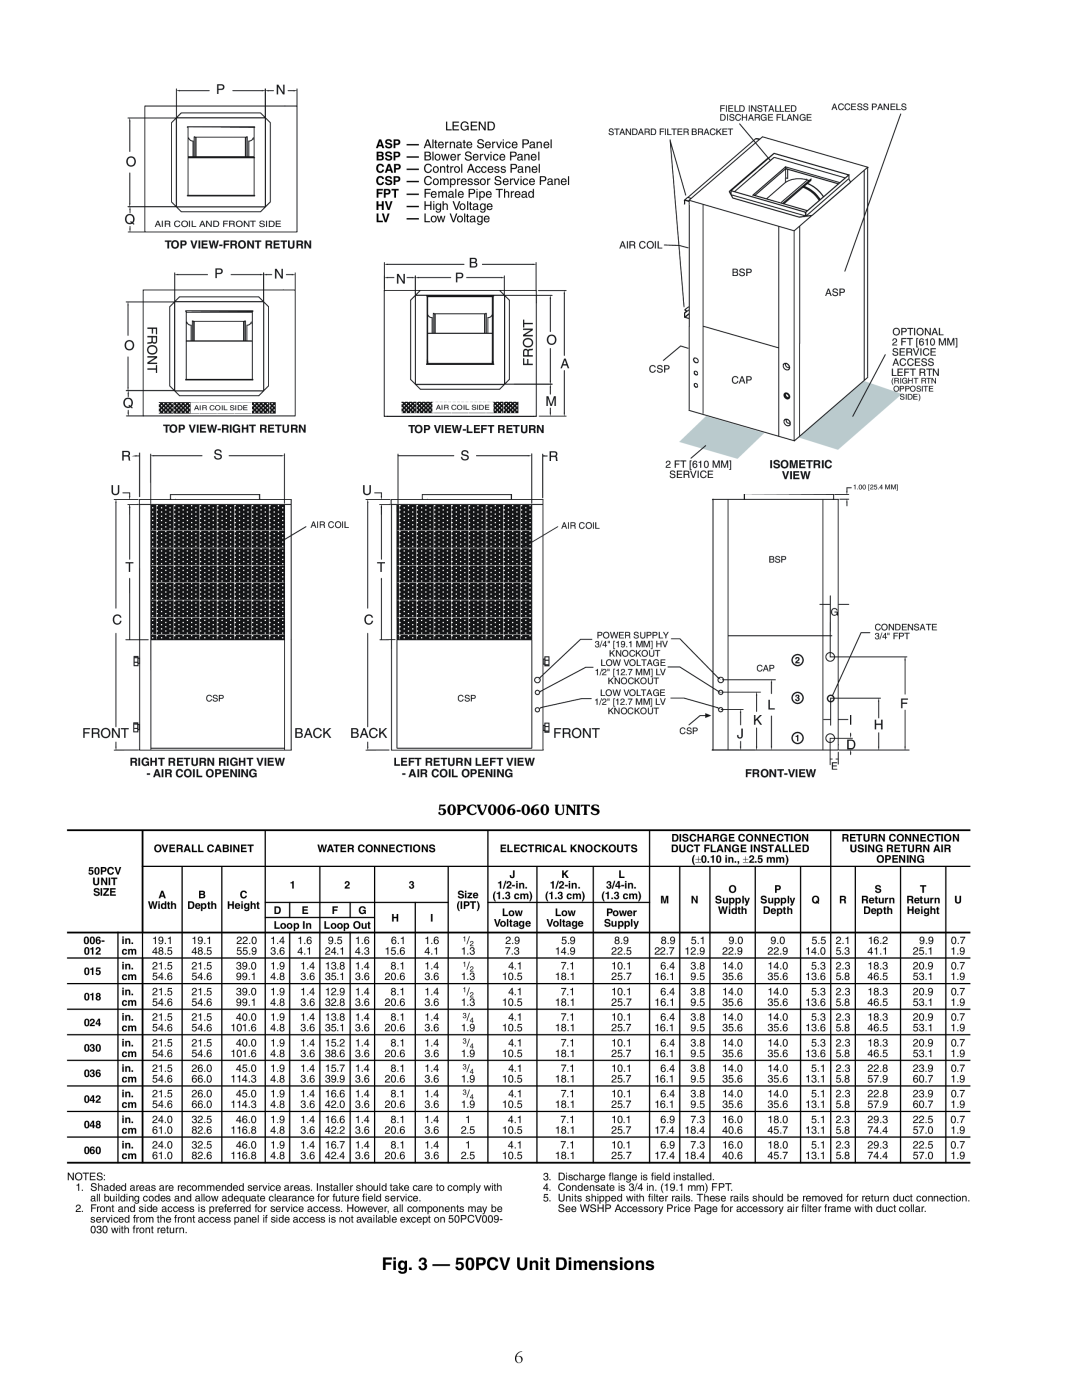 Carrier 50PCH specifications a50-8696, 50PCV Unit Dimensions, 50PCV006-060UNITS 